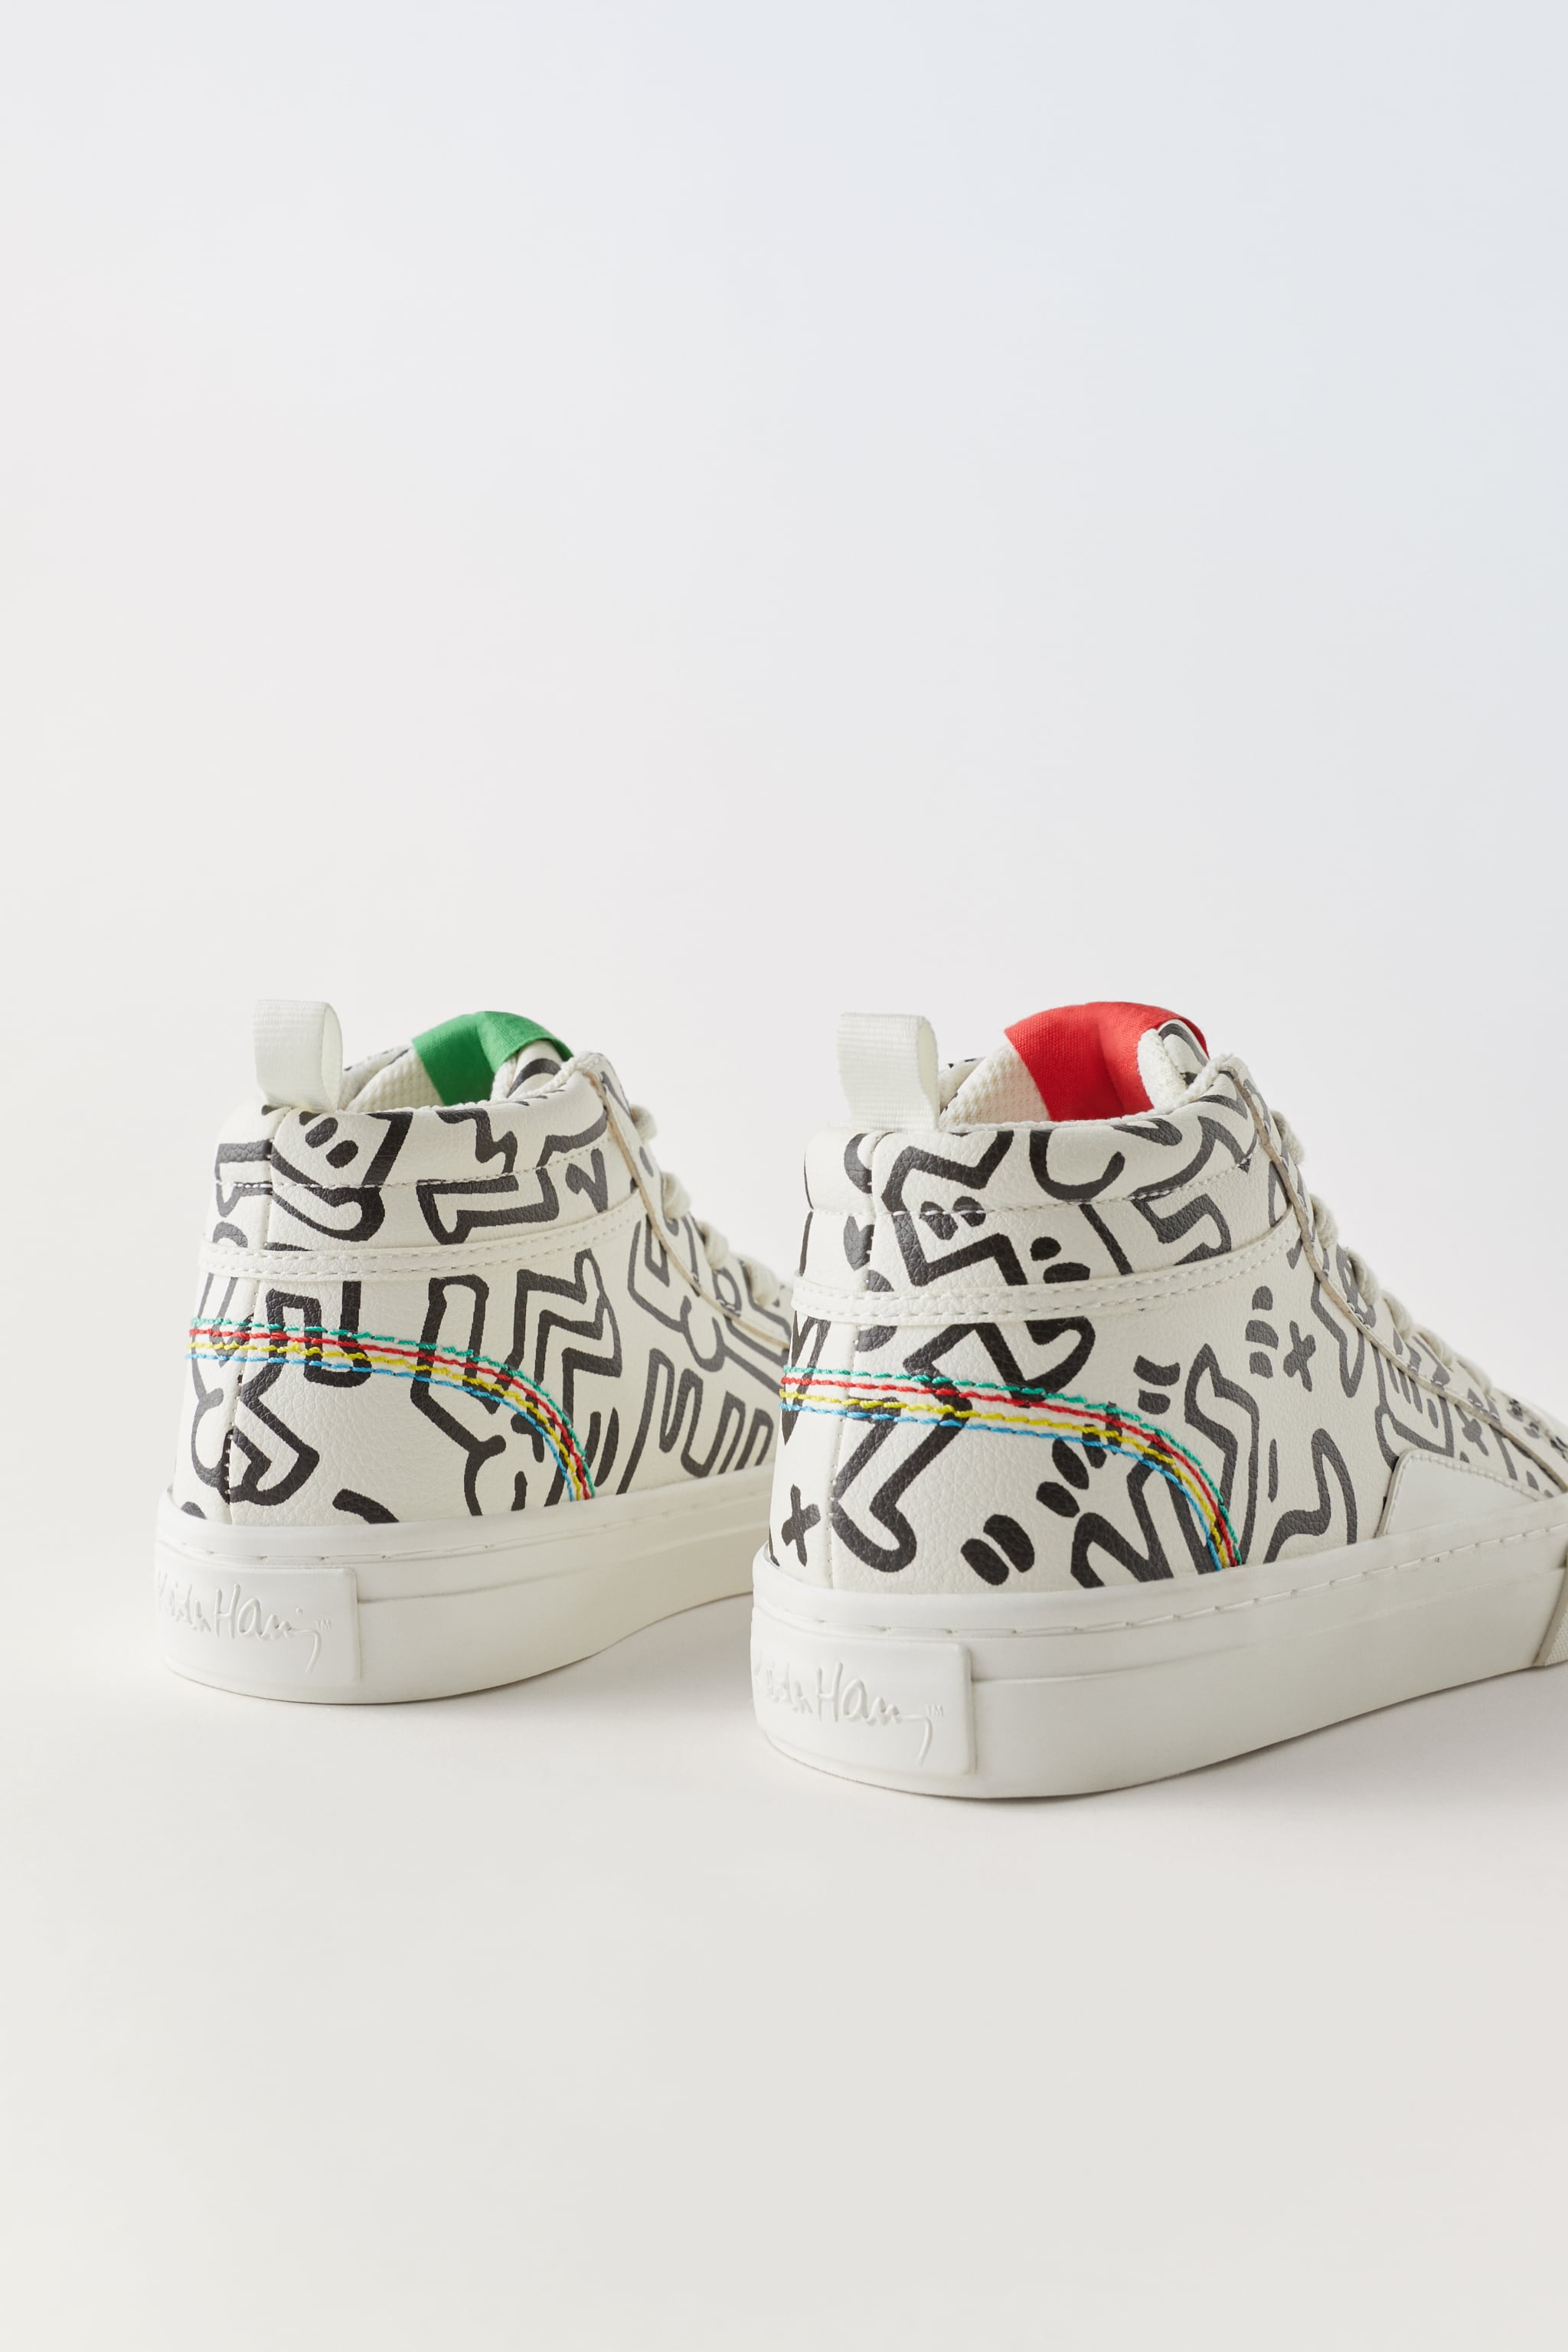 KEITH HARING HIGH TOP SNEAKERS